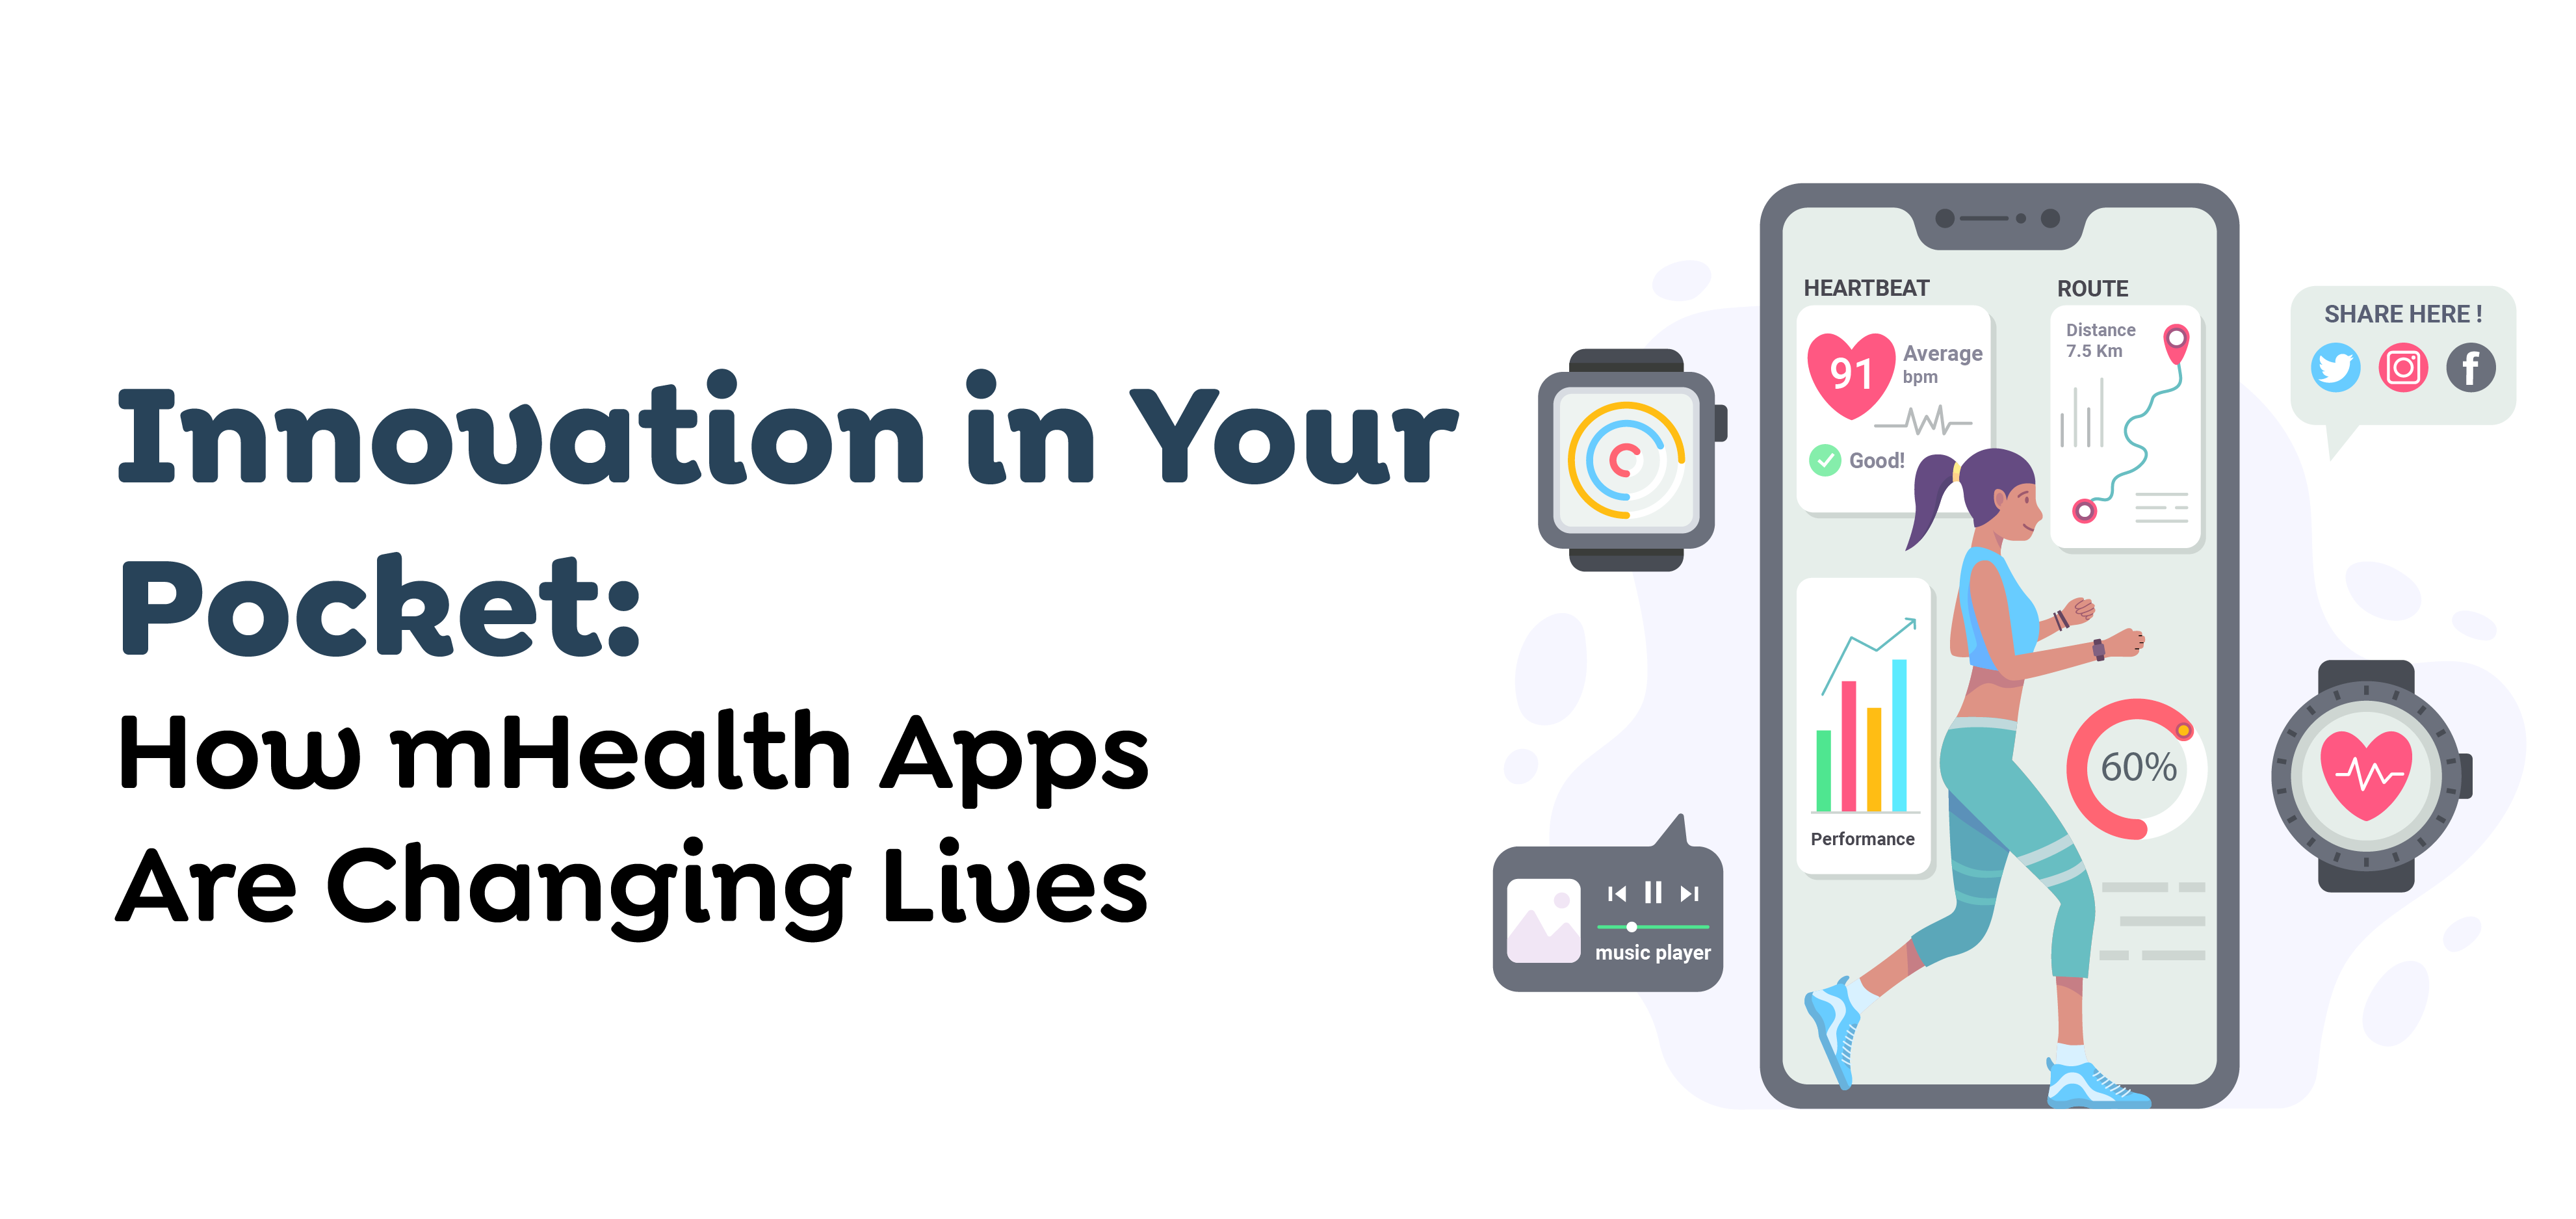 Innovation in Your Pocket How mHealth Apps Are Changing Lives